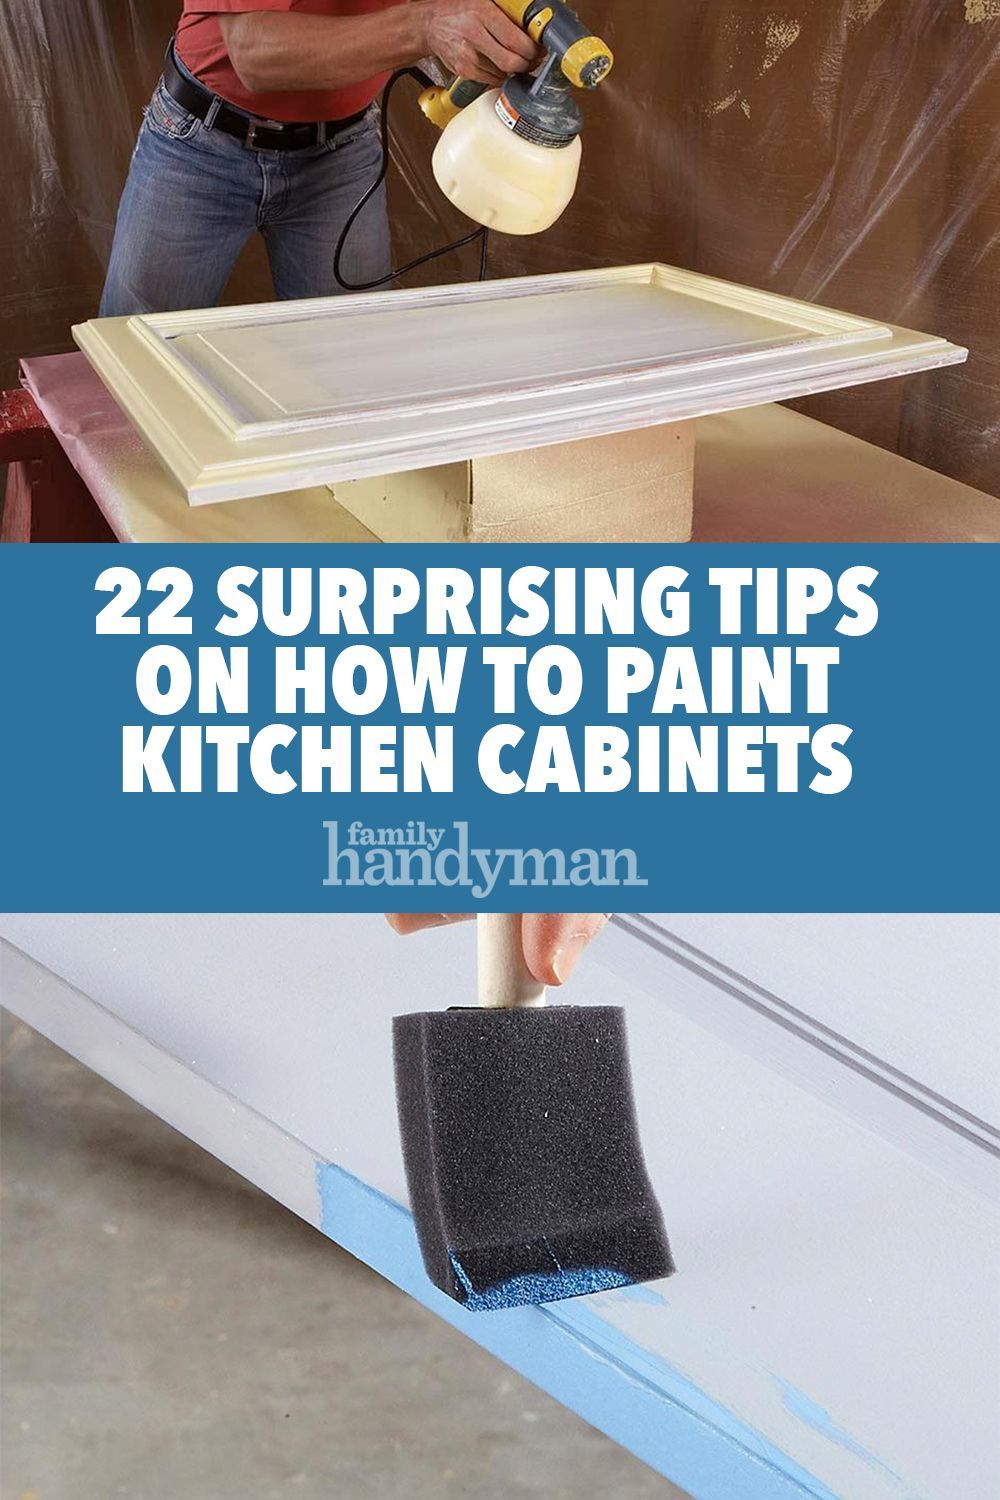 22 Surprising Tips on How to Paint Kitchen Cabinets -   23 diy projects Storage kitchen cabinets ideas